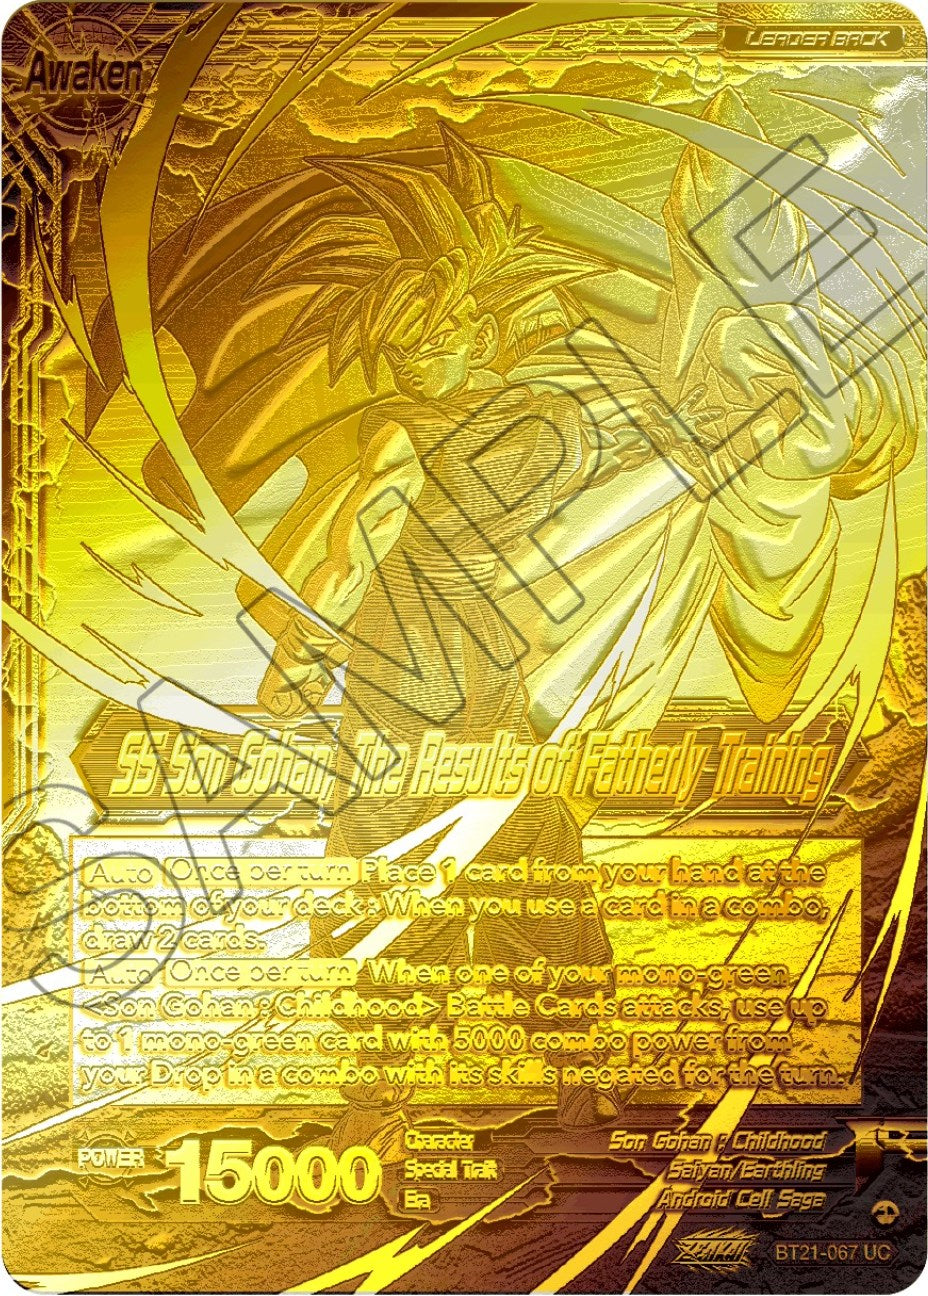 Son Gohan // SS Son Gohan, The Results of Fatherly Training (2023 Championship Finals) (Gold Metal Foil) (BT21-067) [Tournament Promotion Cards] | Amazing Games TCG